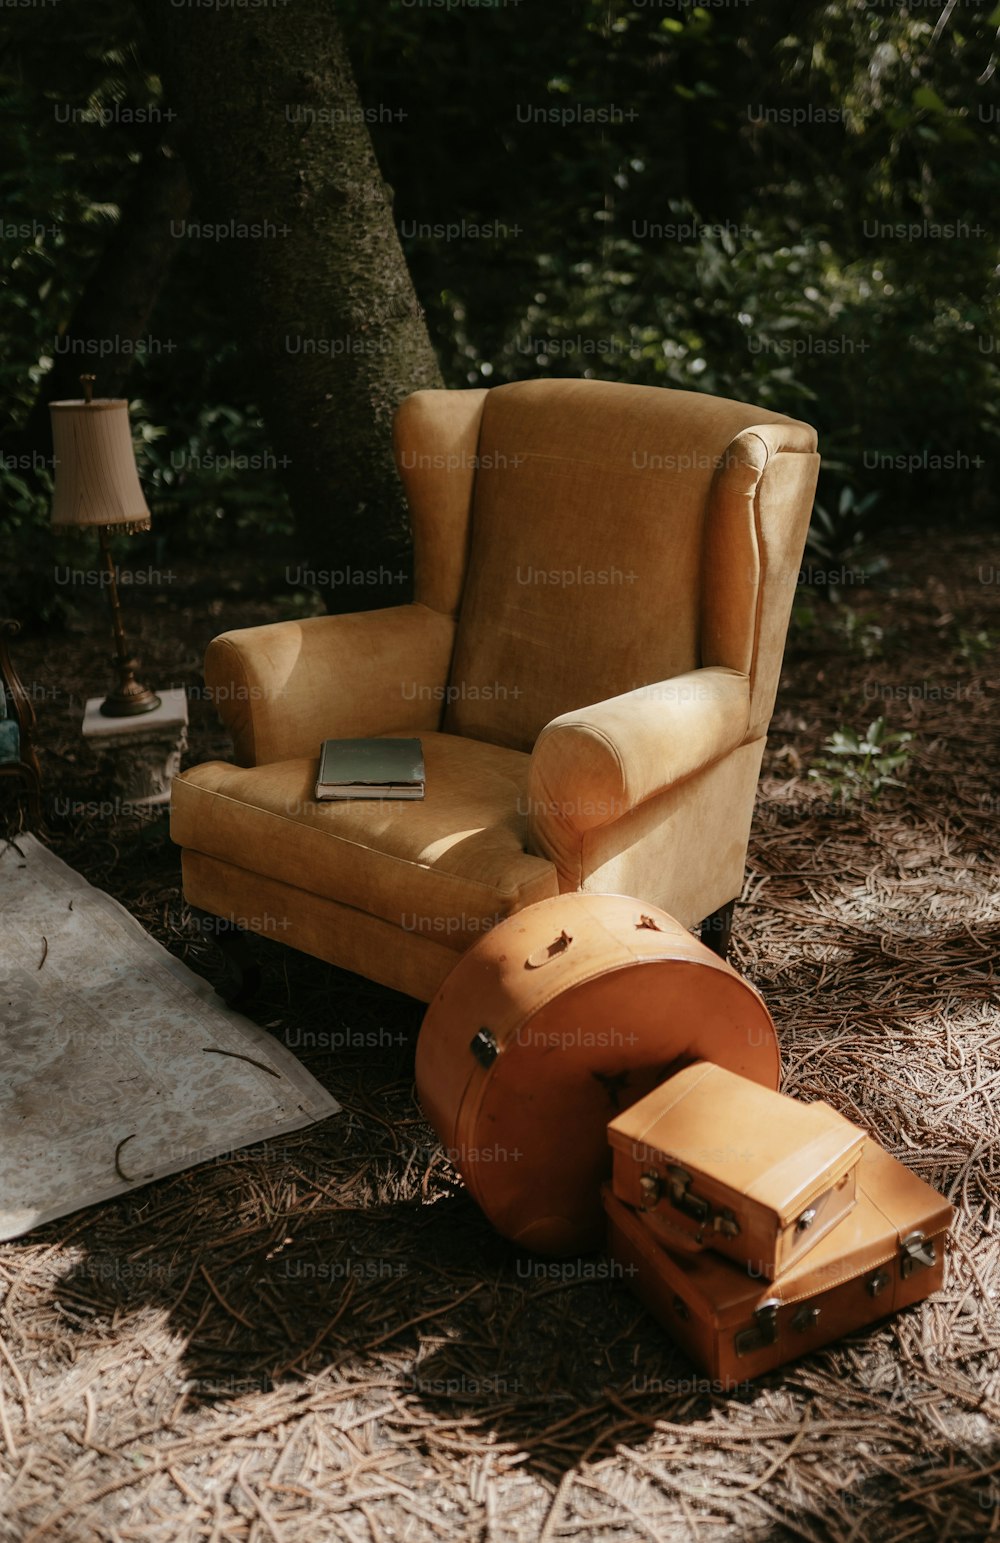 a chair, suitcases, and a lamp in the woods